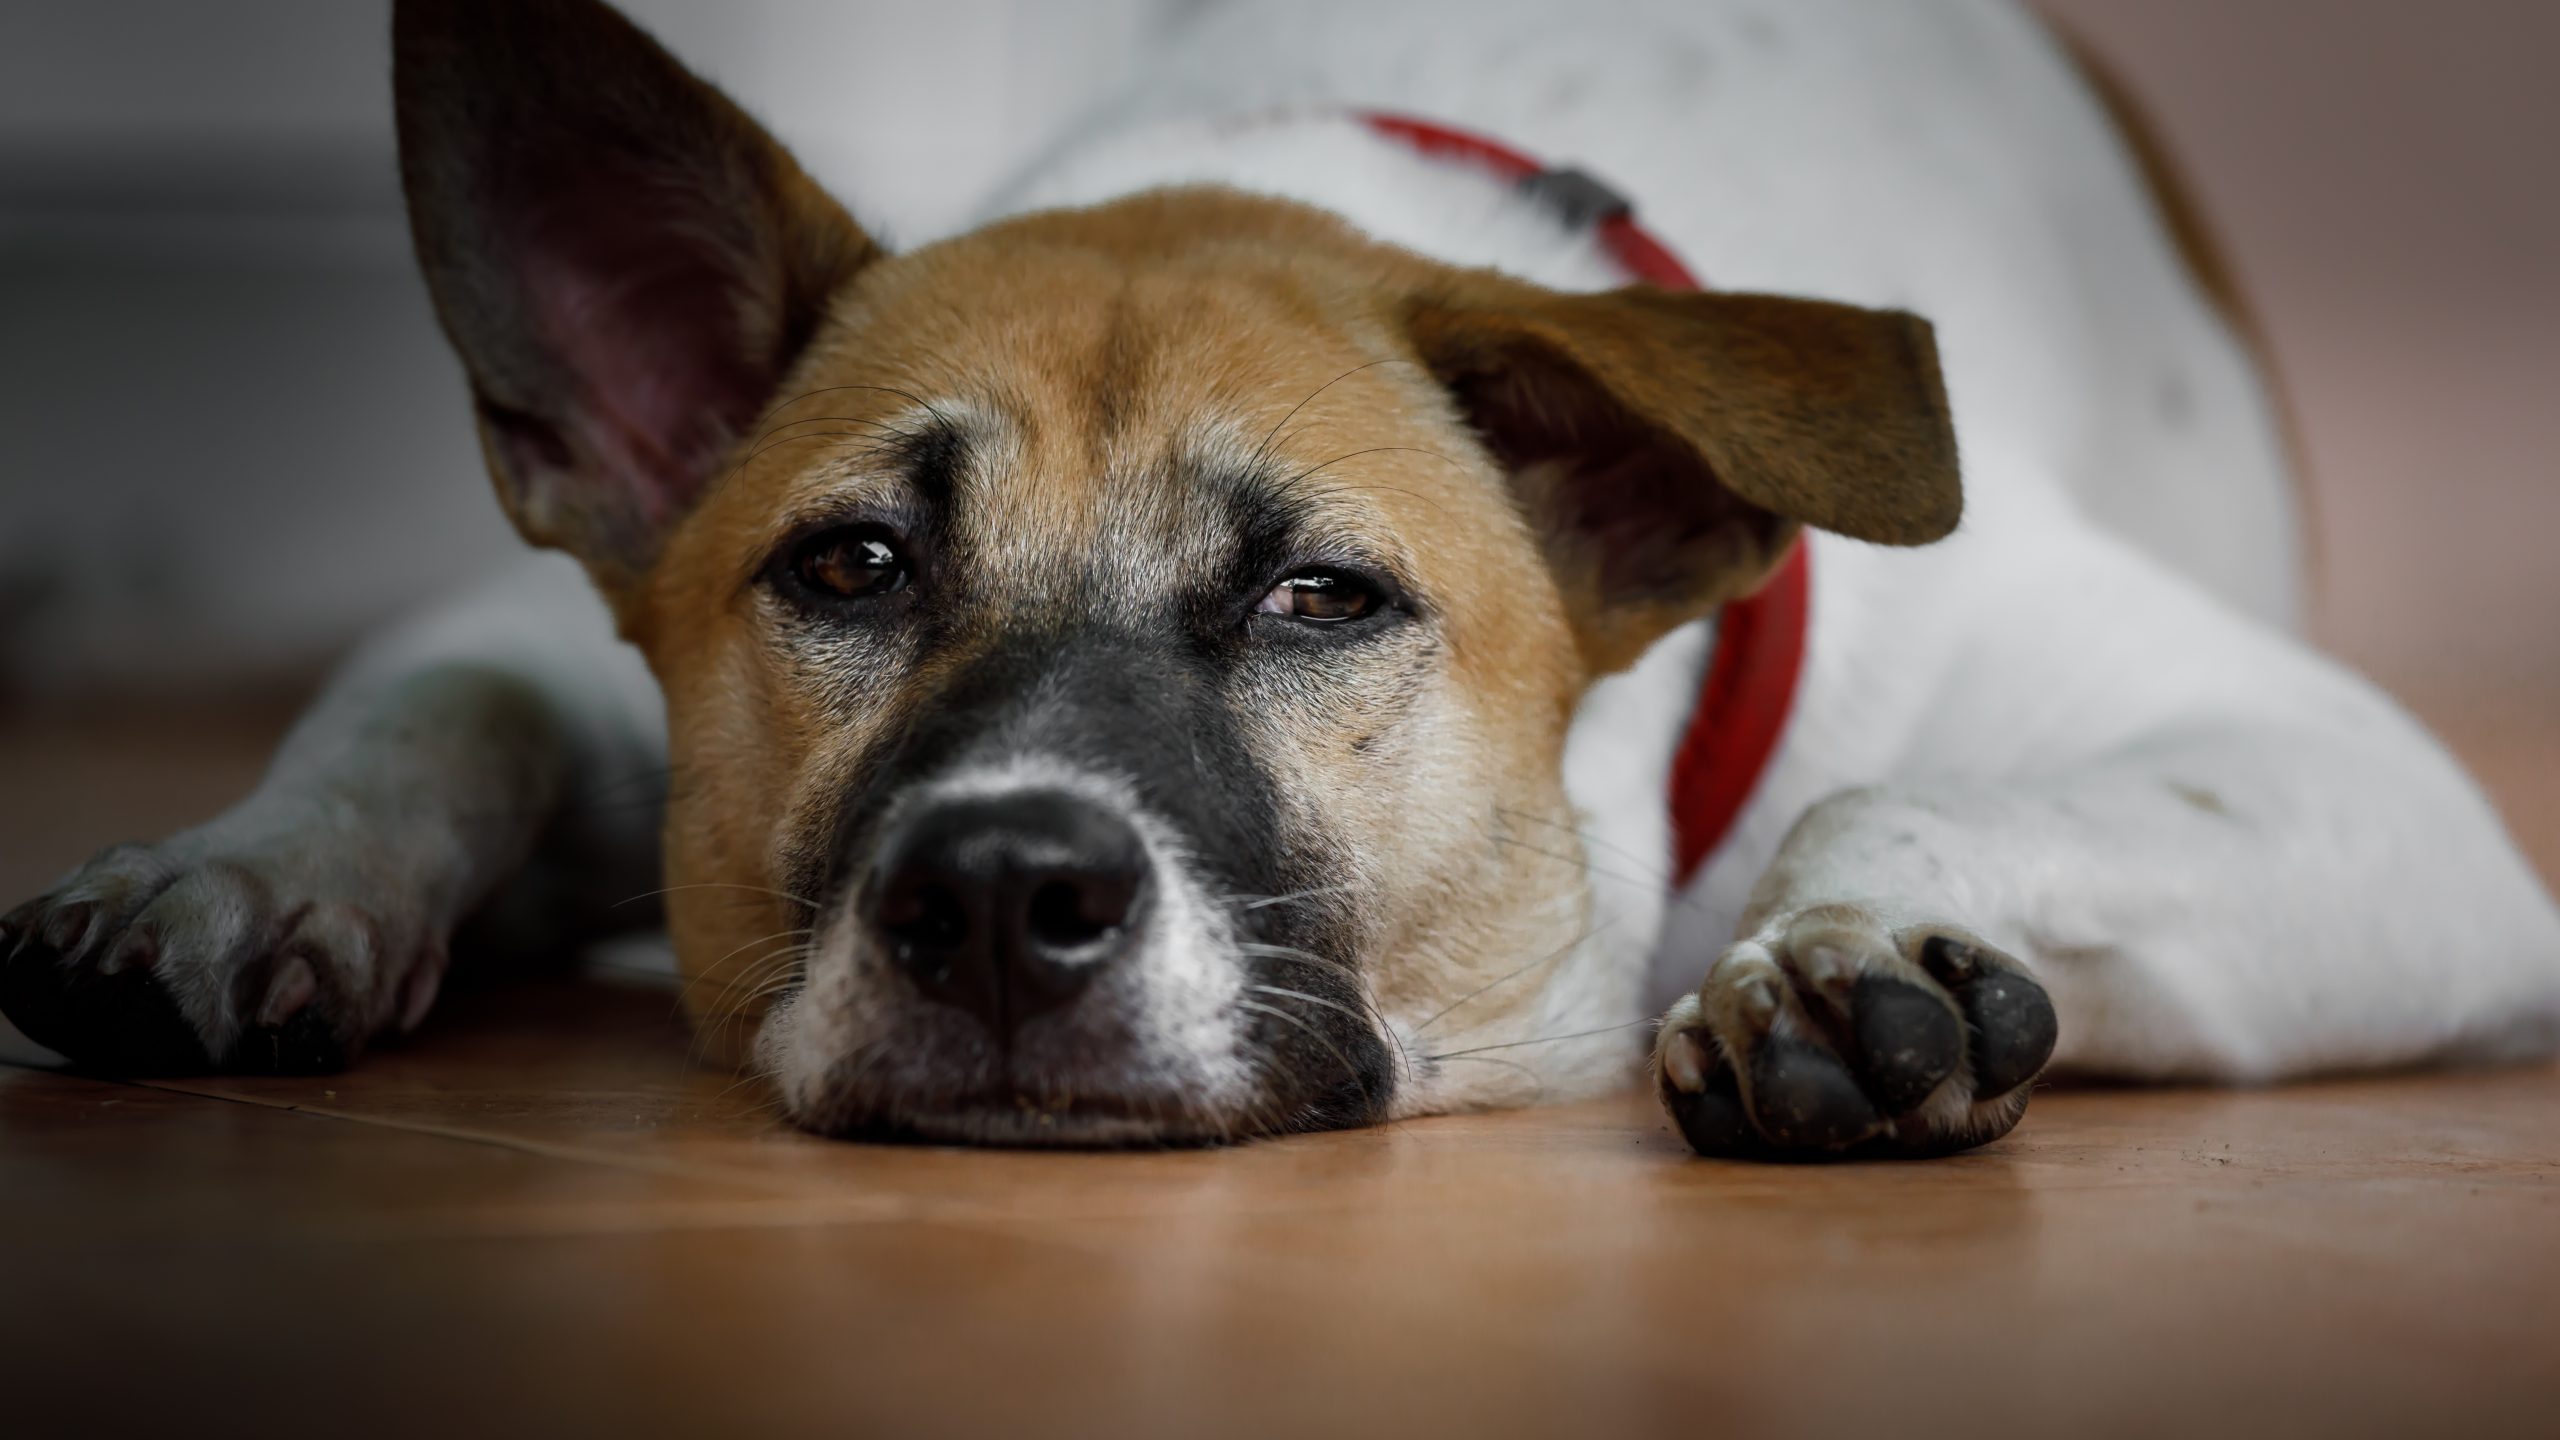 It is very common for dogs to experience separation anxiety when their owners leave the house.